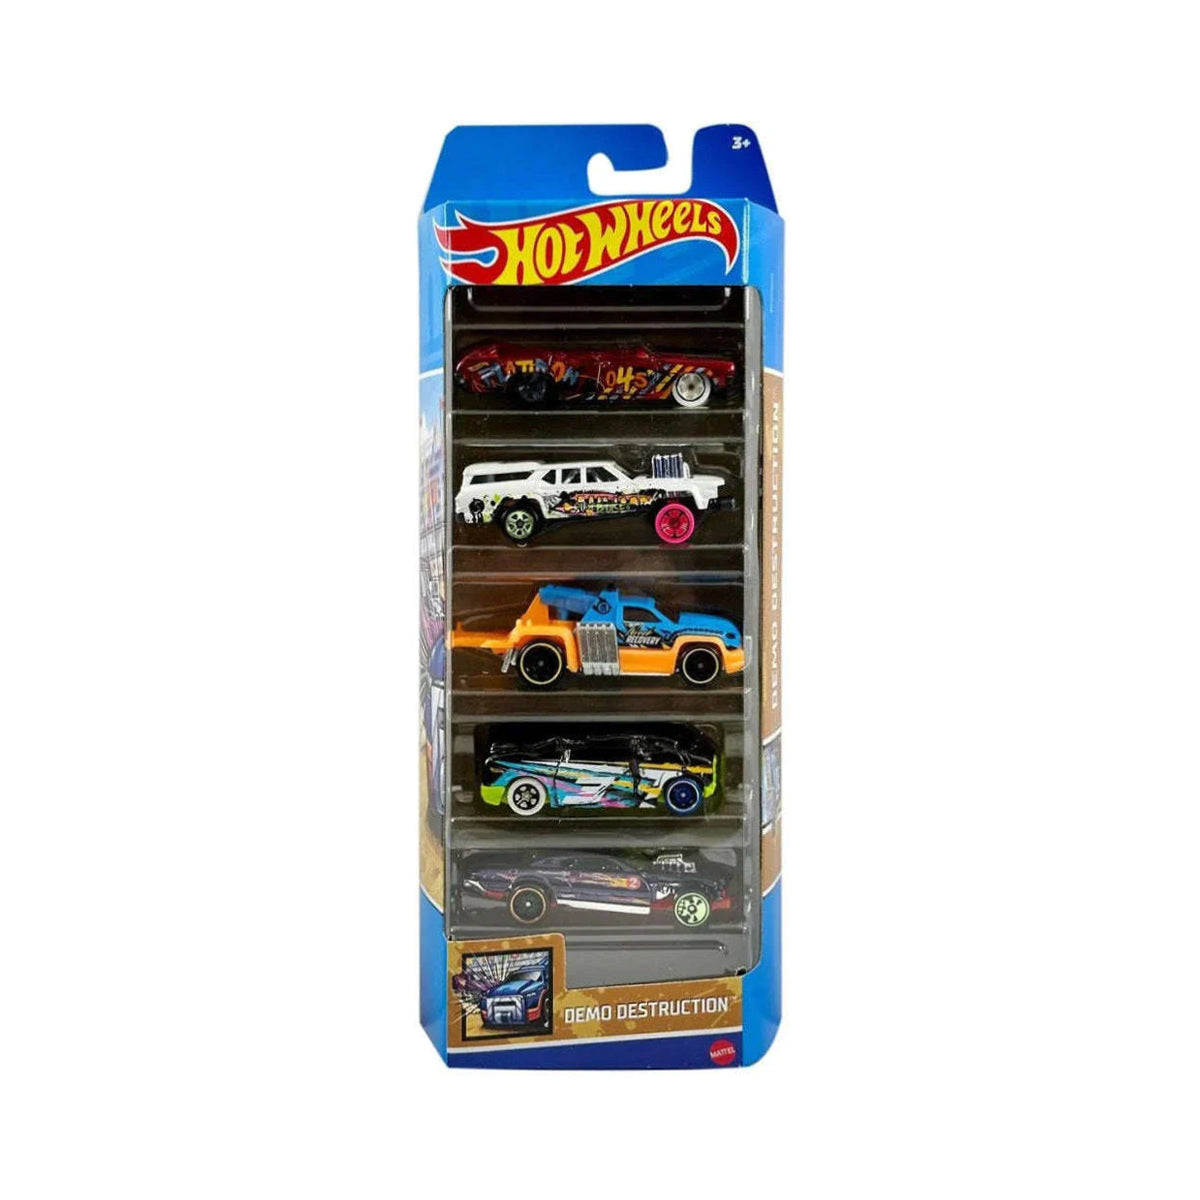 Hot Wheels 5 Car Gift Pack with 5 Premium Diecast Models - DesignStyles May Vary - Only 1 Pack Included